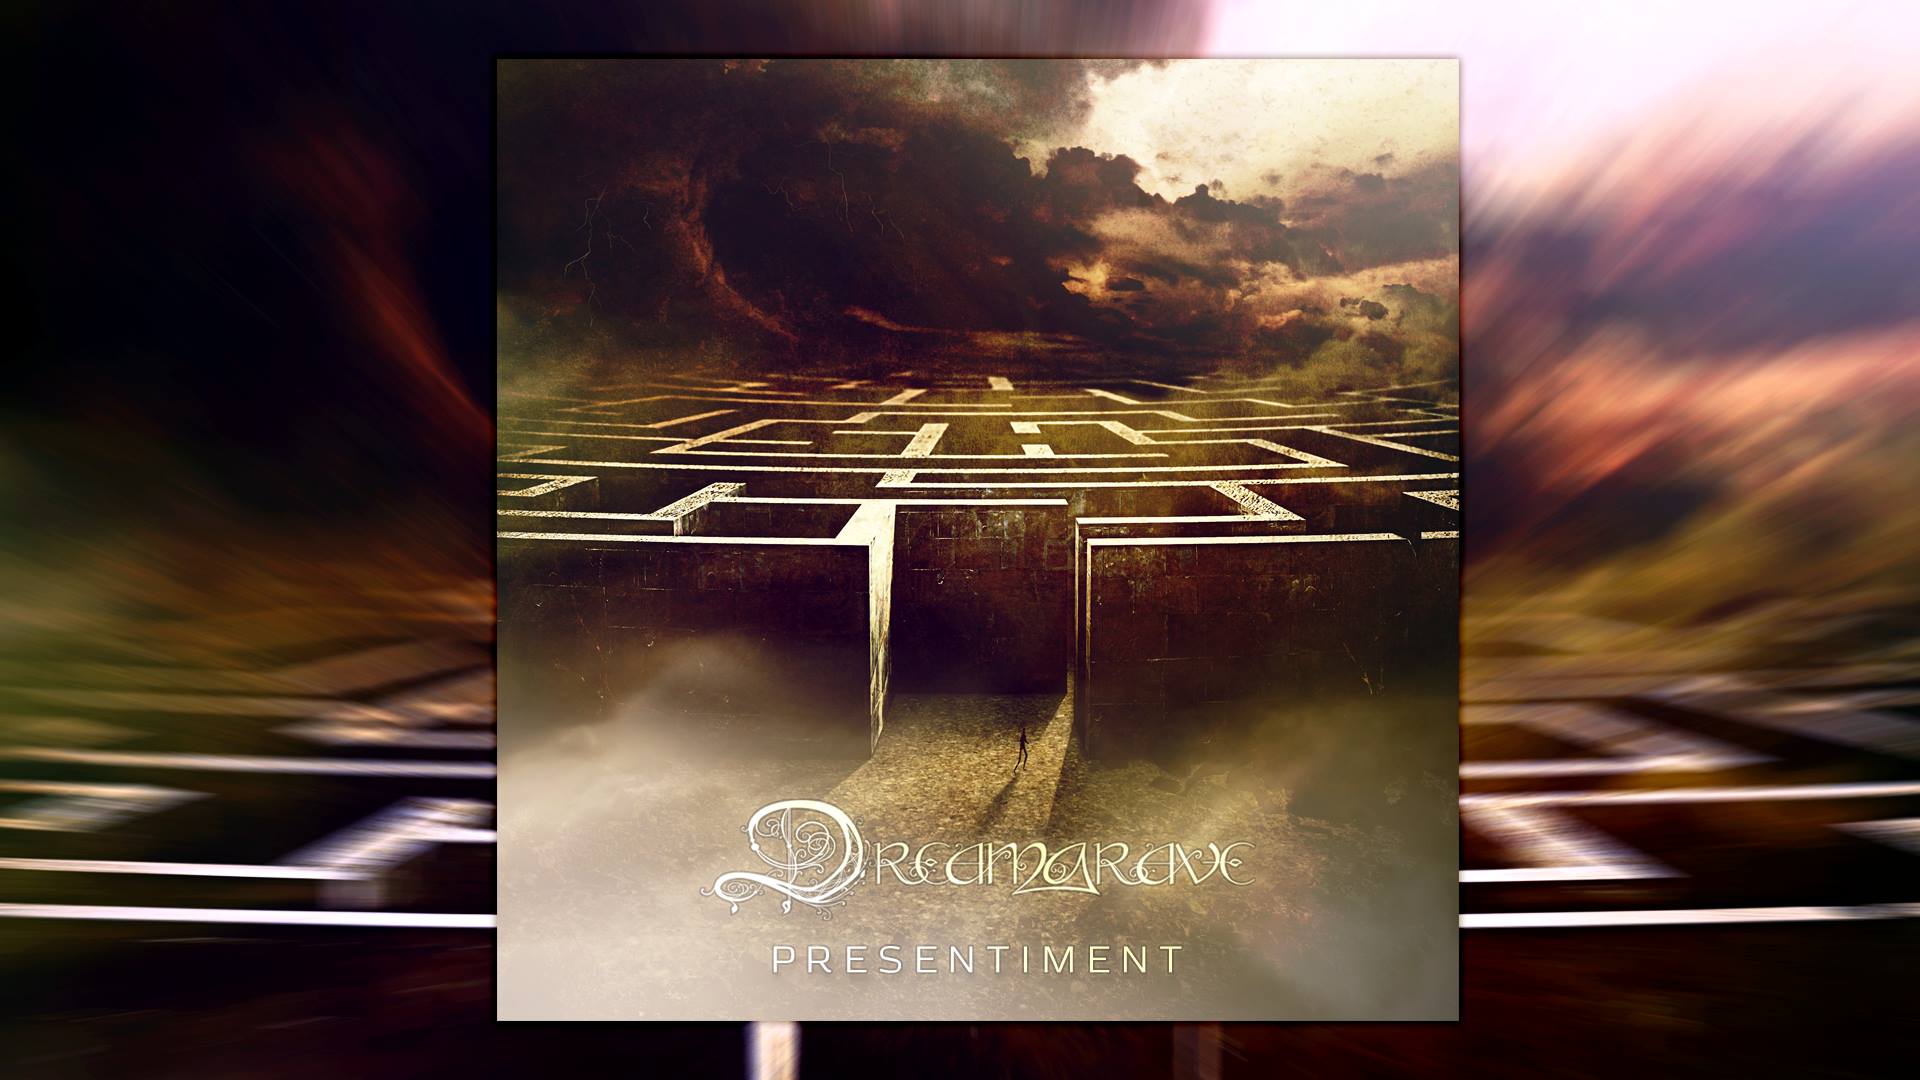 dreamgrave_presentiment_cover.jpg